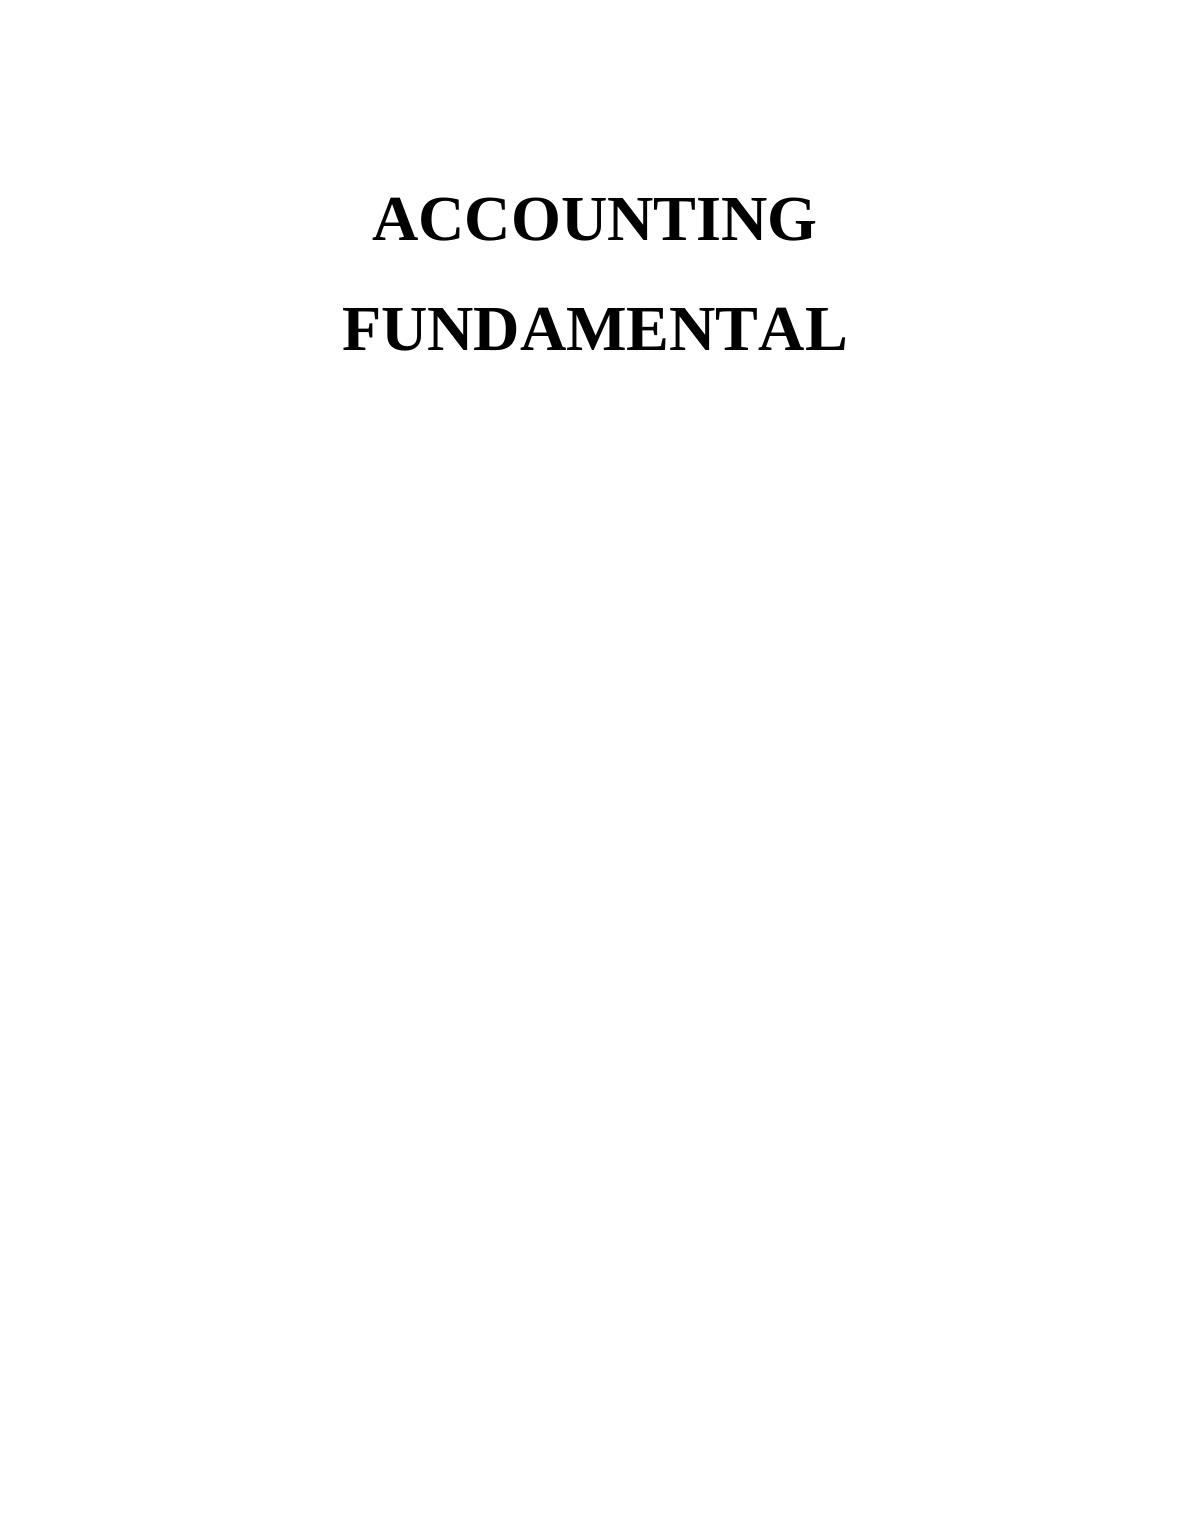 Fundamentals of Accounting - Aassignment_1